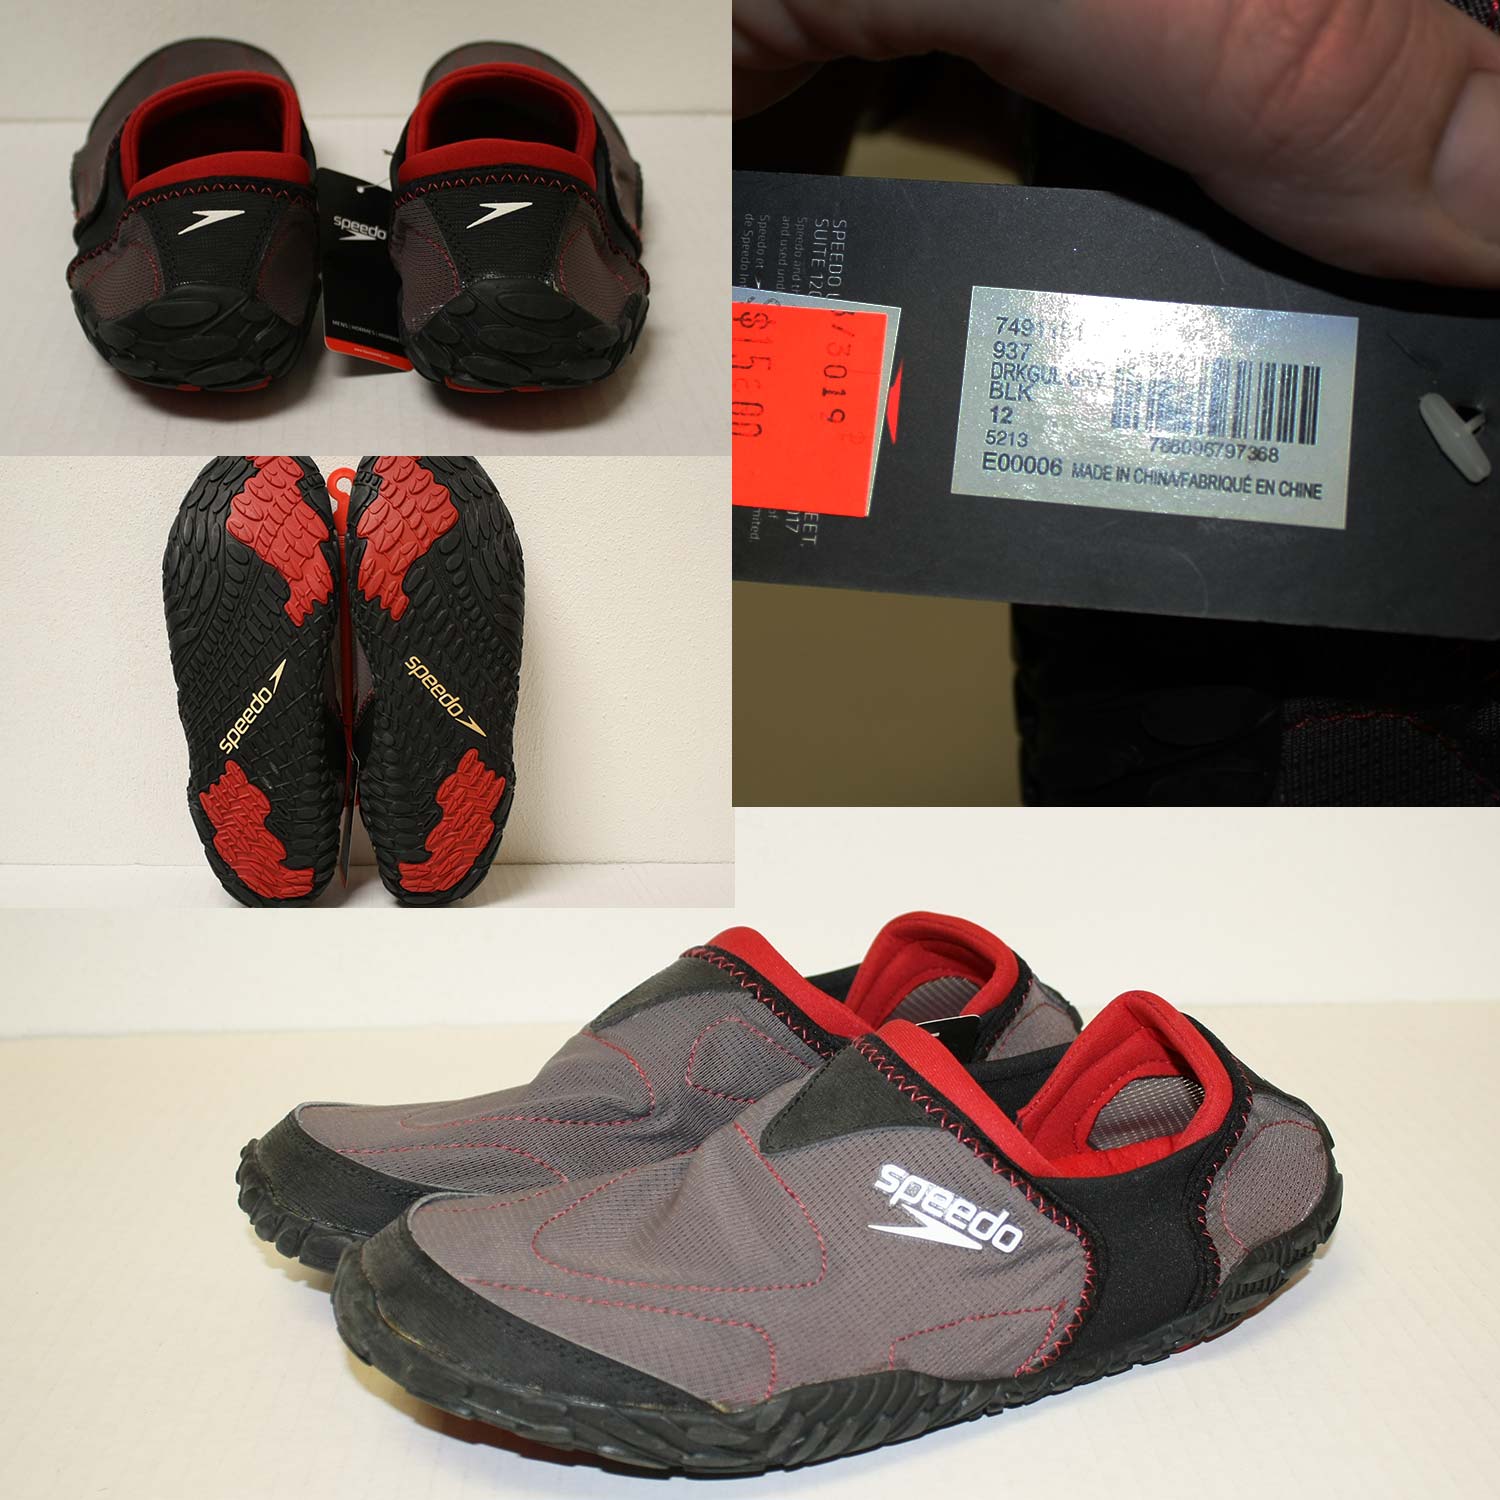 size 12 men's water shoes